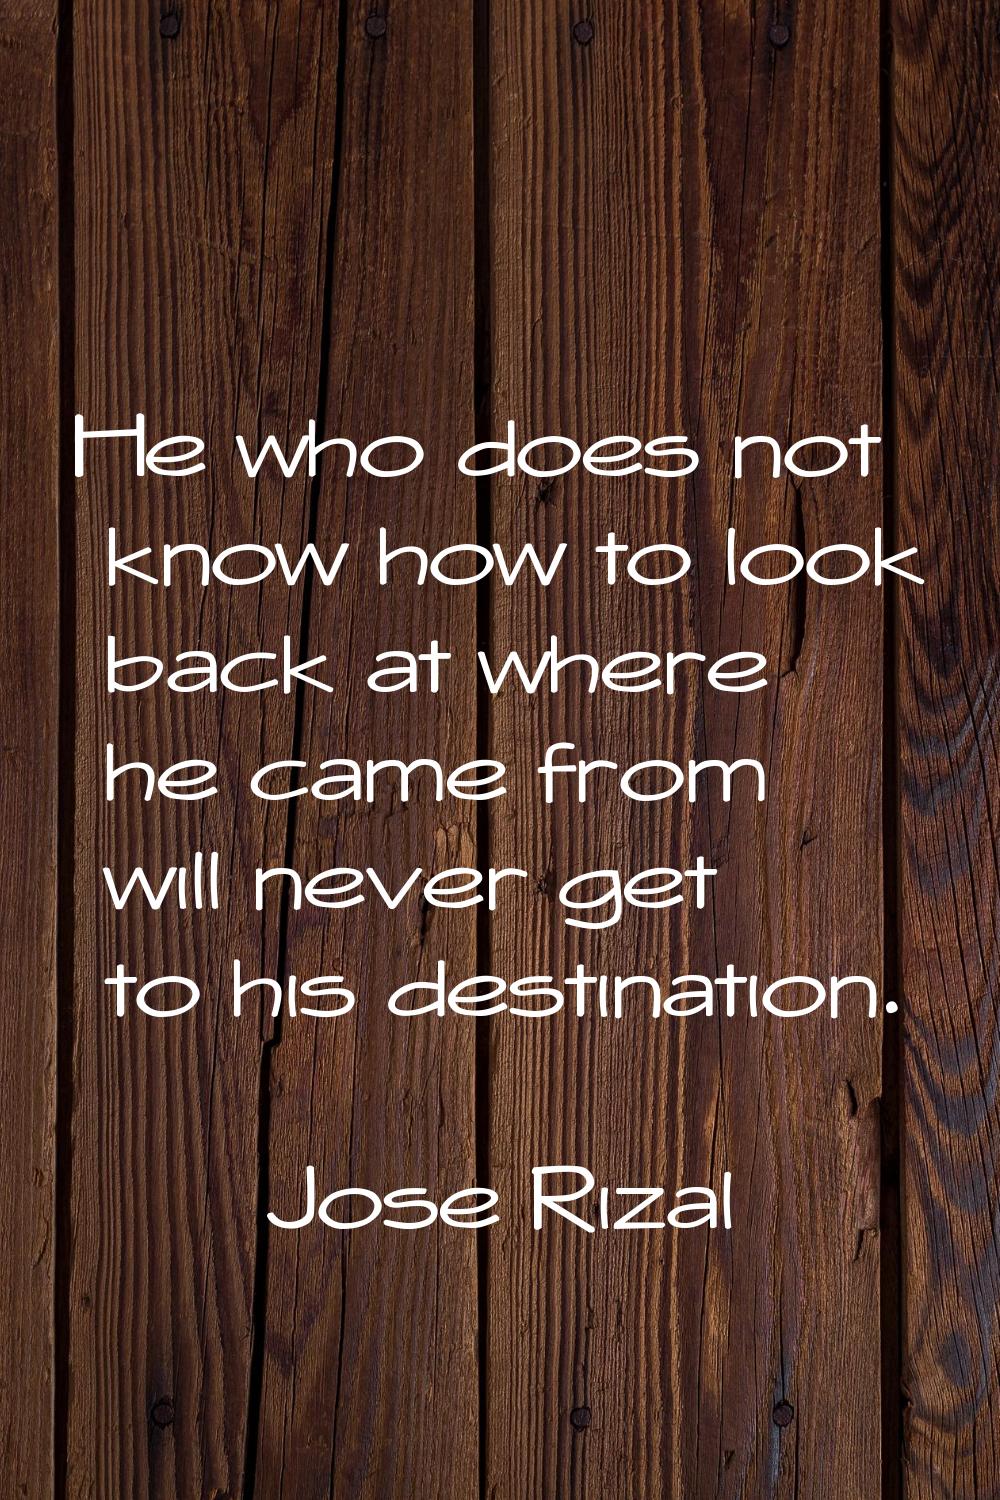 He who does not know how to look back at where he came from will never get to his destination.